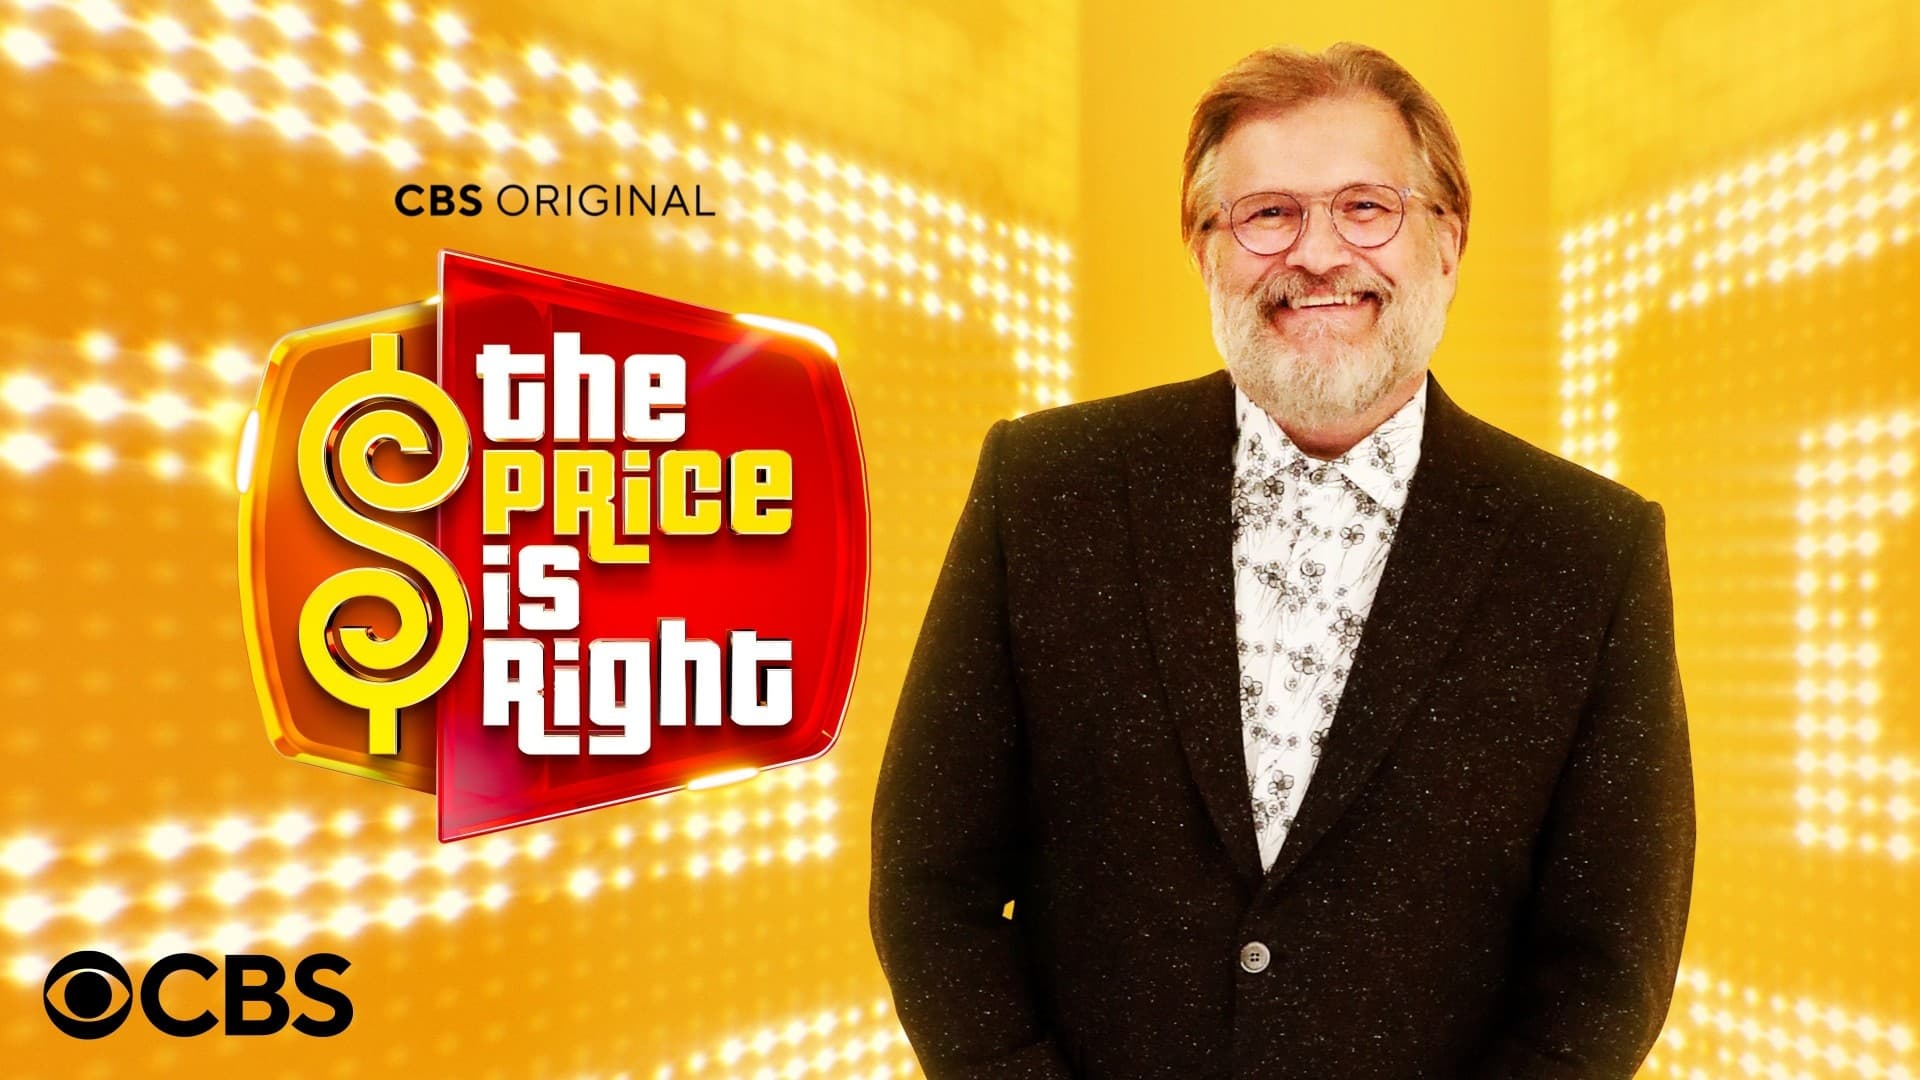 The Price Is Right - Season 2 Episode 84 : The Price Is Right Season 2 Episode 84